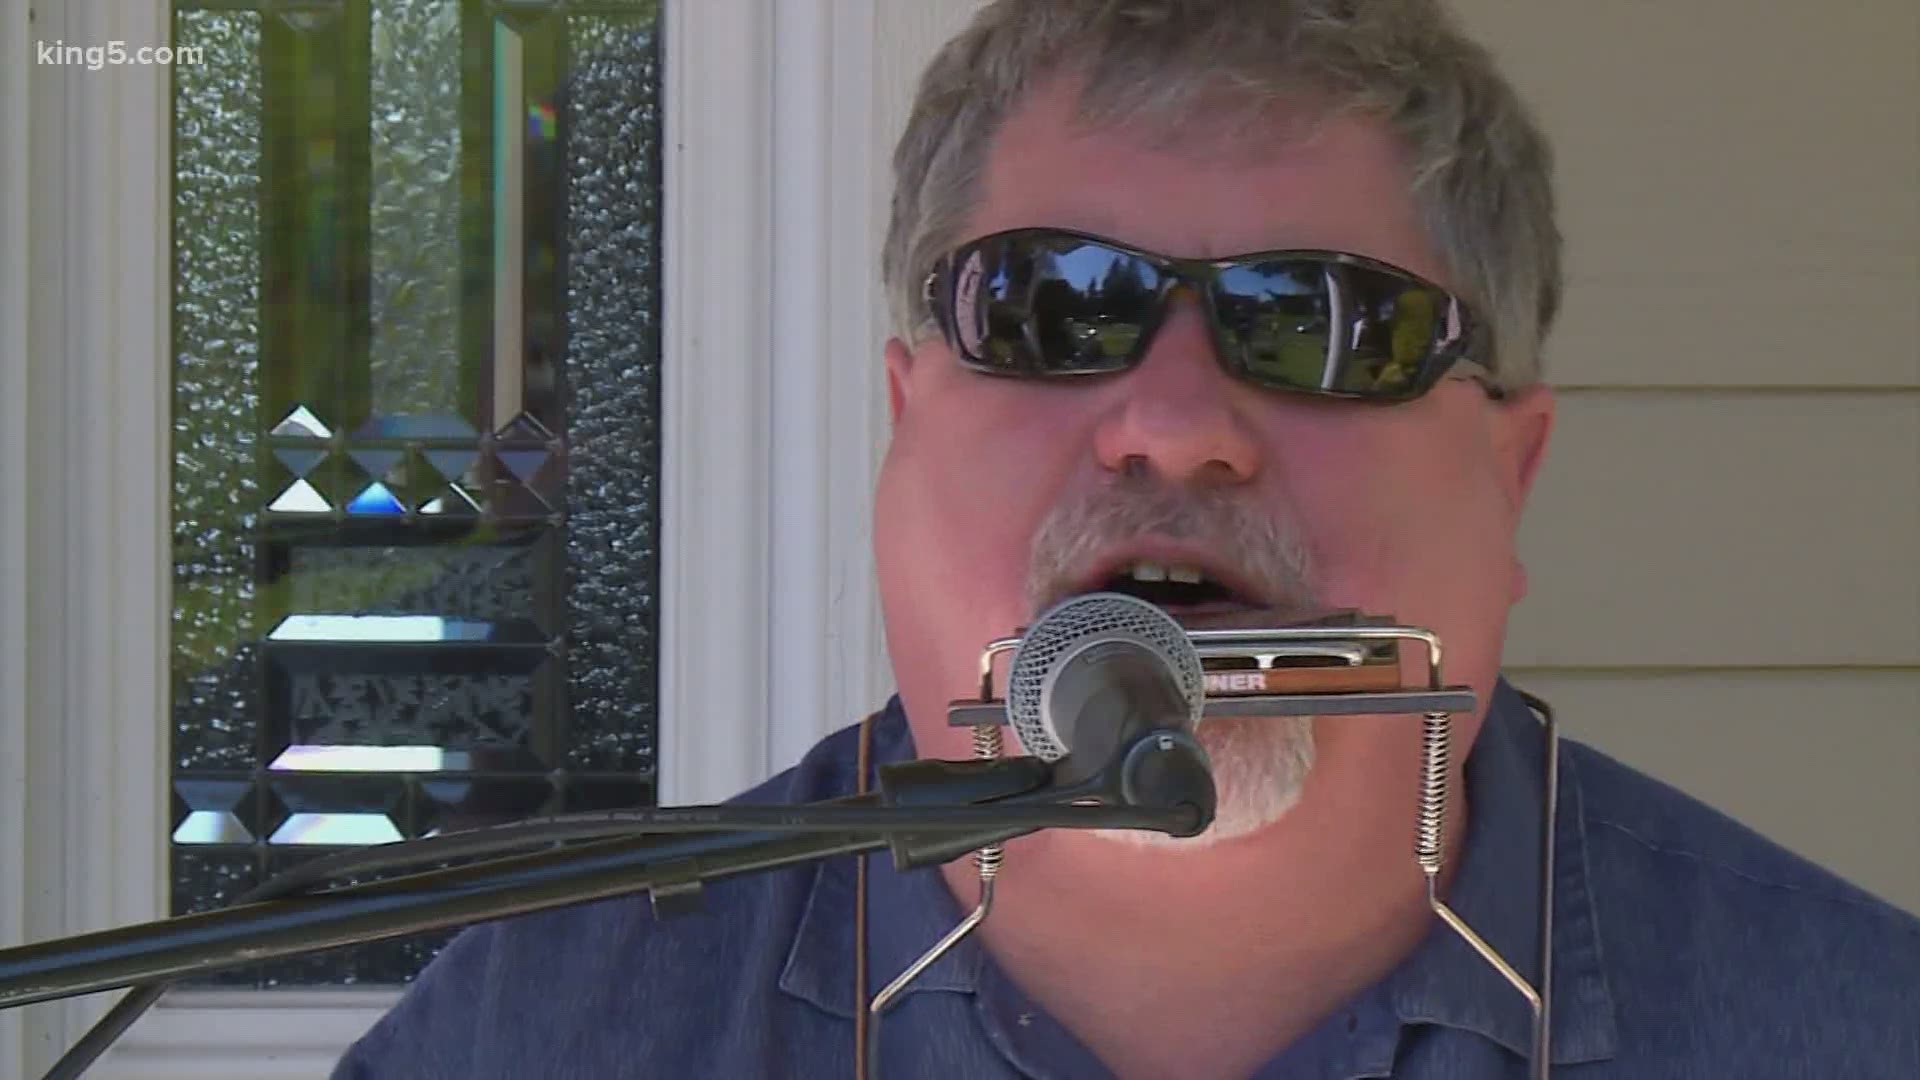 Music is his passion -- so the blind musician is sharing his talent with the neighborhood while Washington venues remain closed by coronavirus.